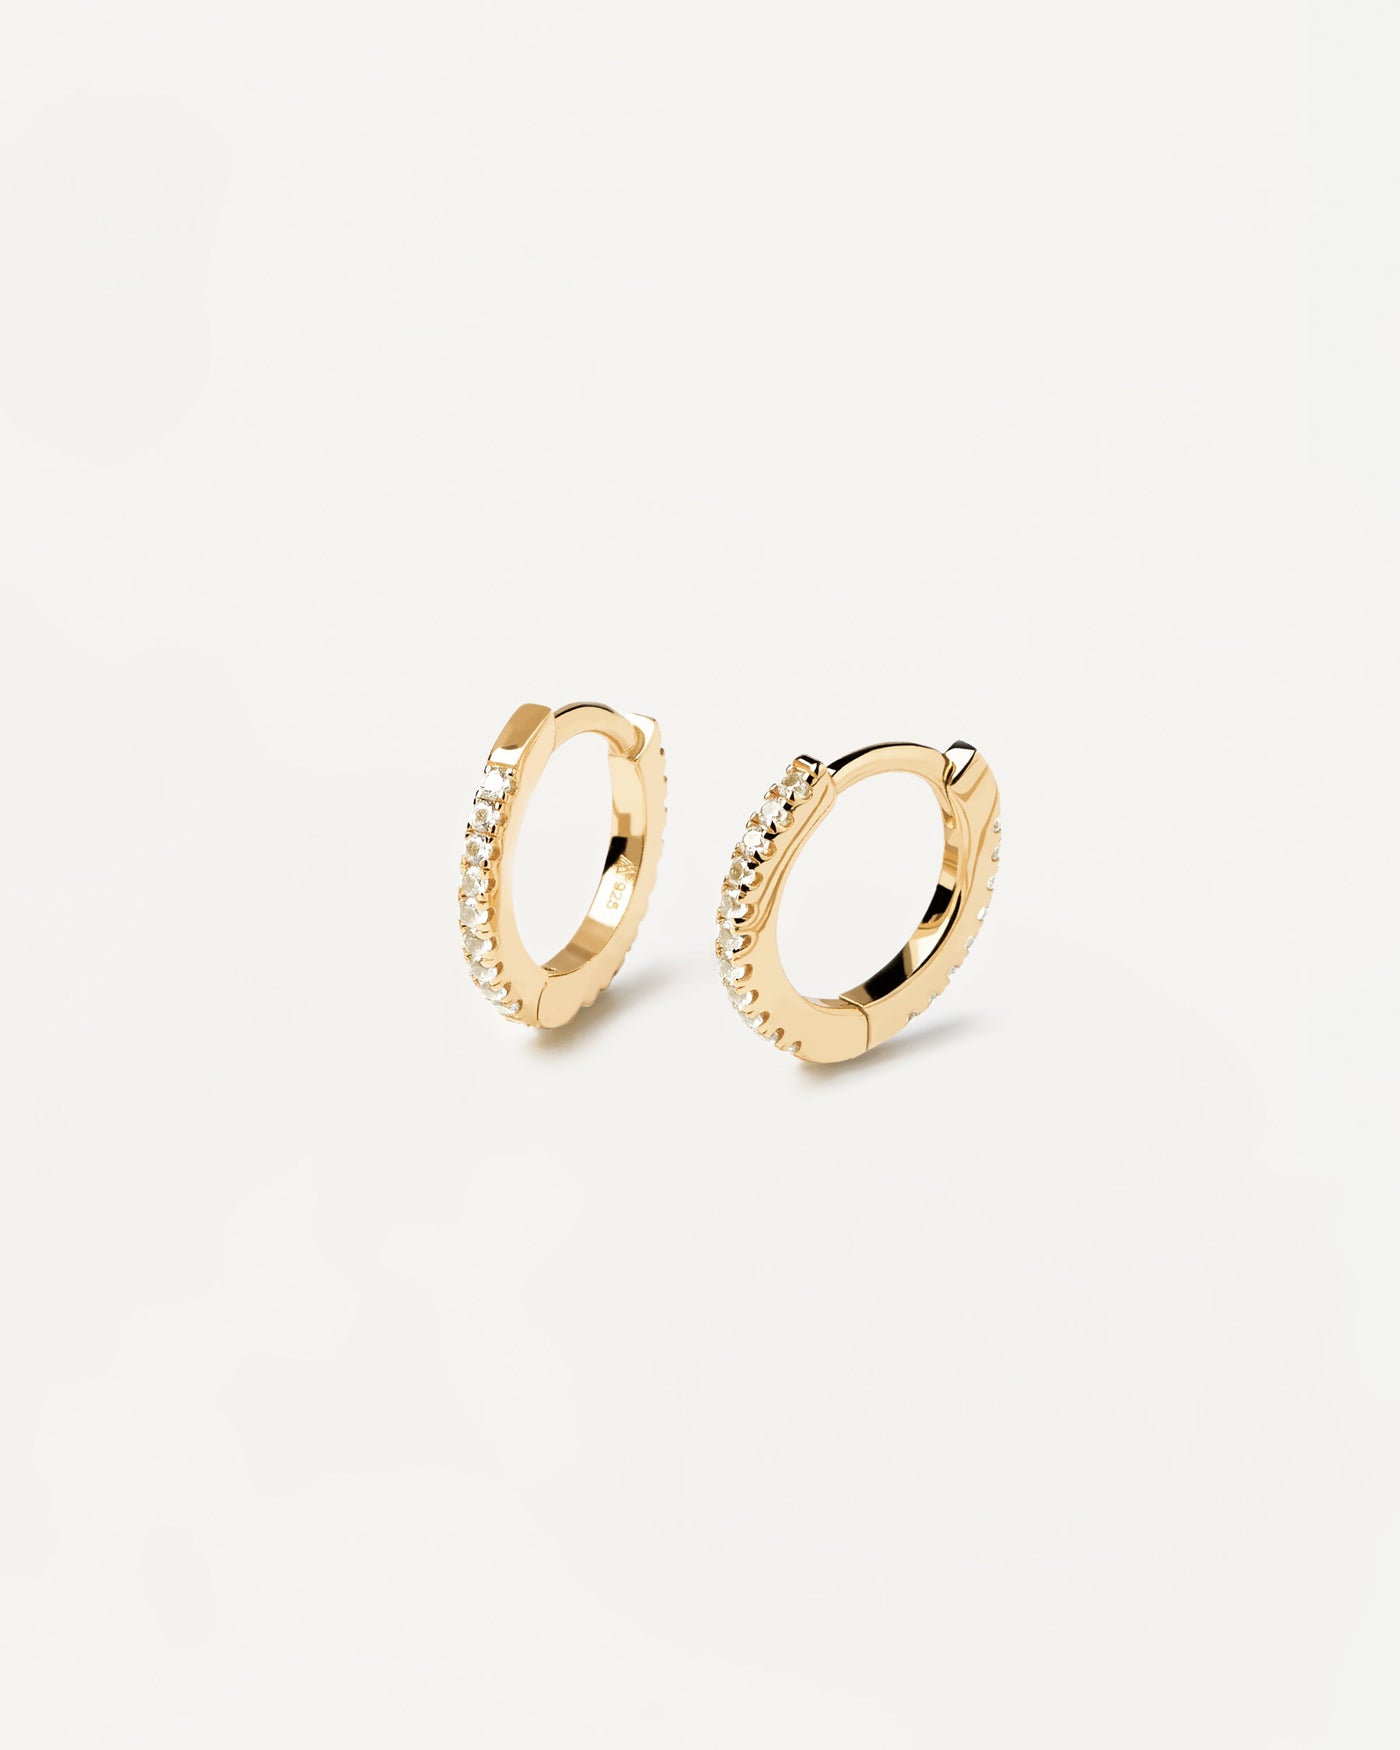 2023 Selection | White Mini Hoops. Hoop latch-back earrings in 18k gold plated silver set with white zirconia. Get the latest arrival from PDPAOLA. Place your order safely and get this Best Seller. Free Shipping.